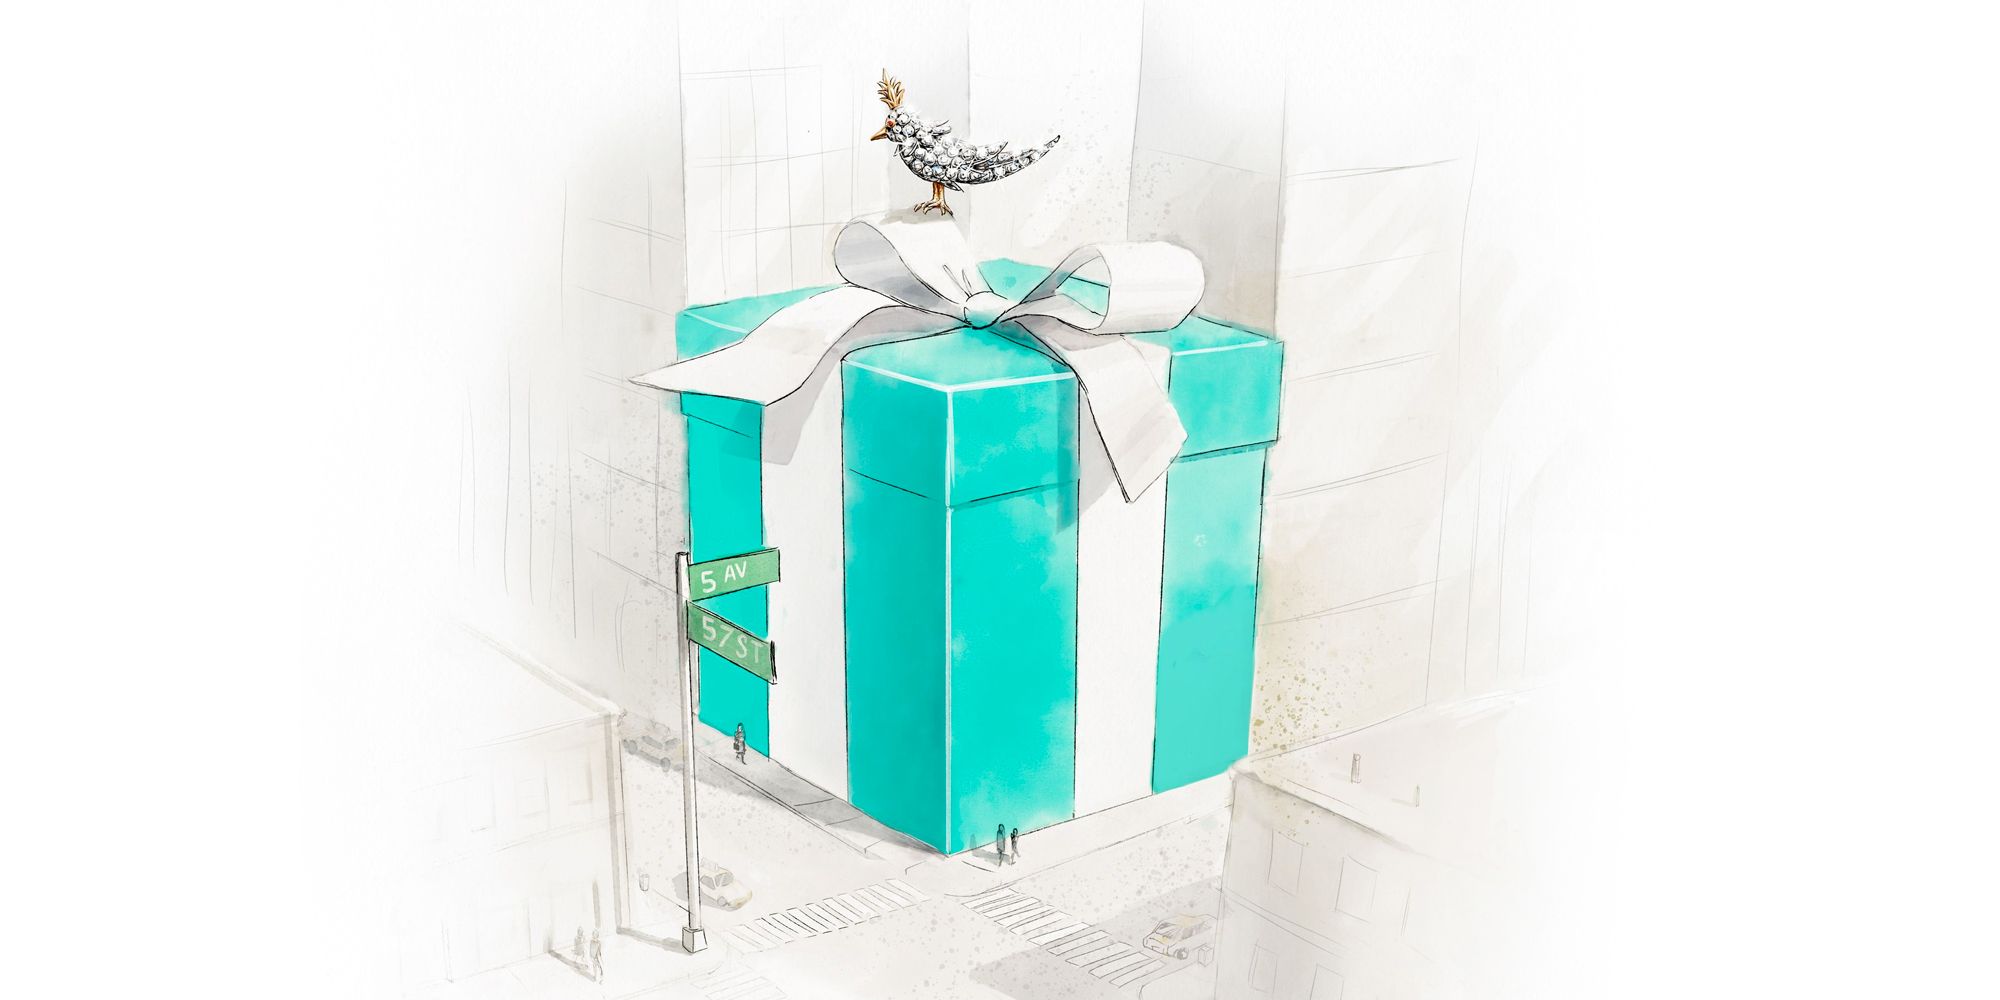 Tiffany & Co. moving from Bellevue to new Walnut Street location